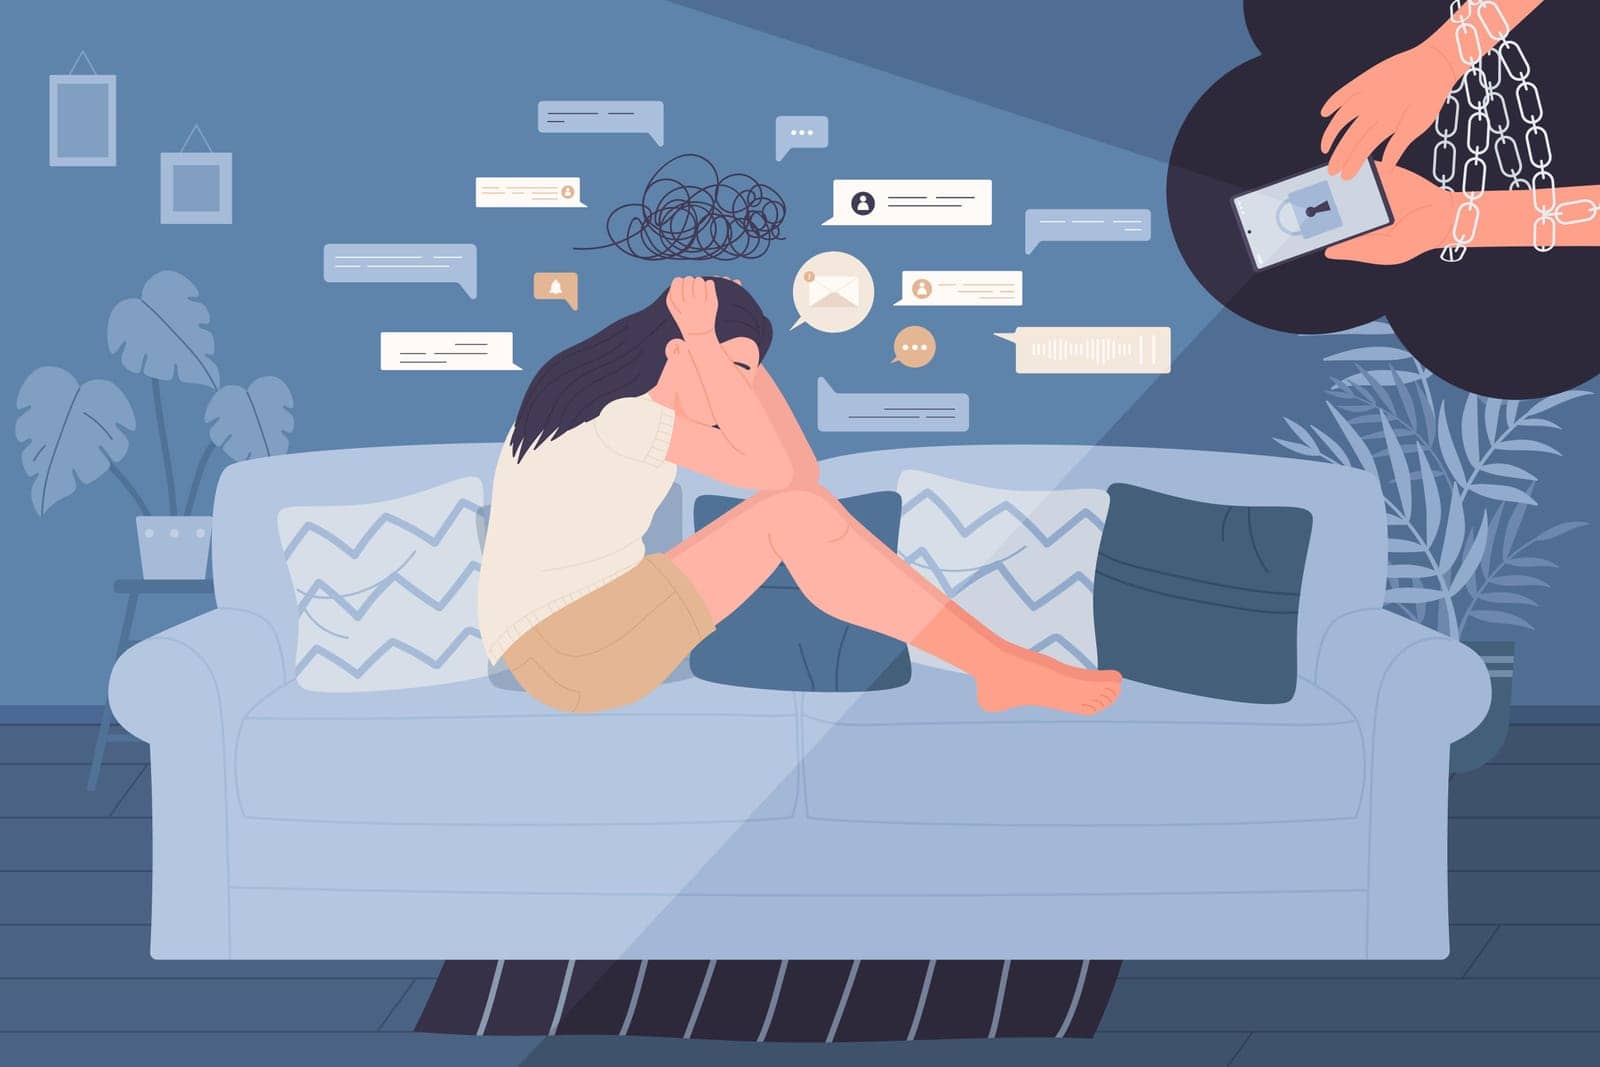 Internet addict suffering from mania, obsession with social media vector illustration. Cartoon crazy sad girl sitting on couch alone, hands with chain holding smartphone. Fixation, addiction concept